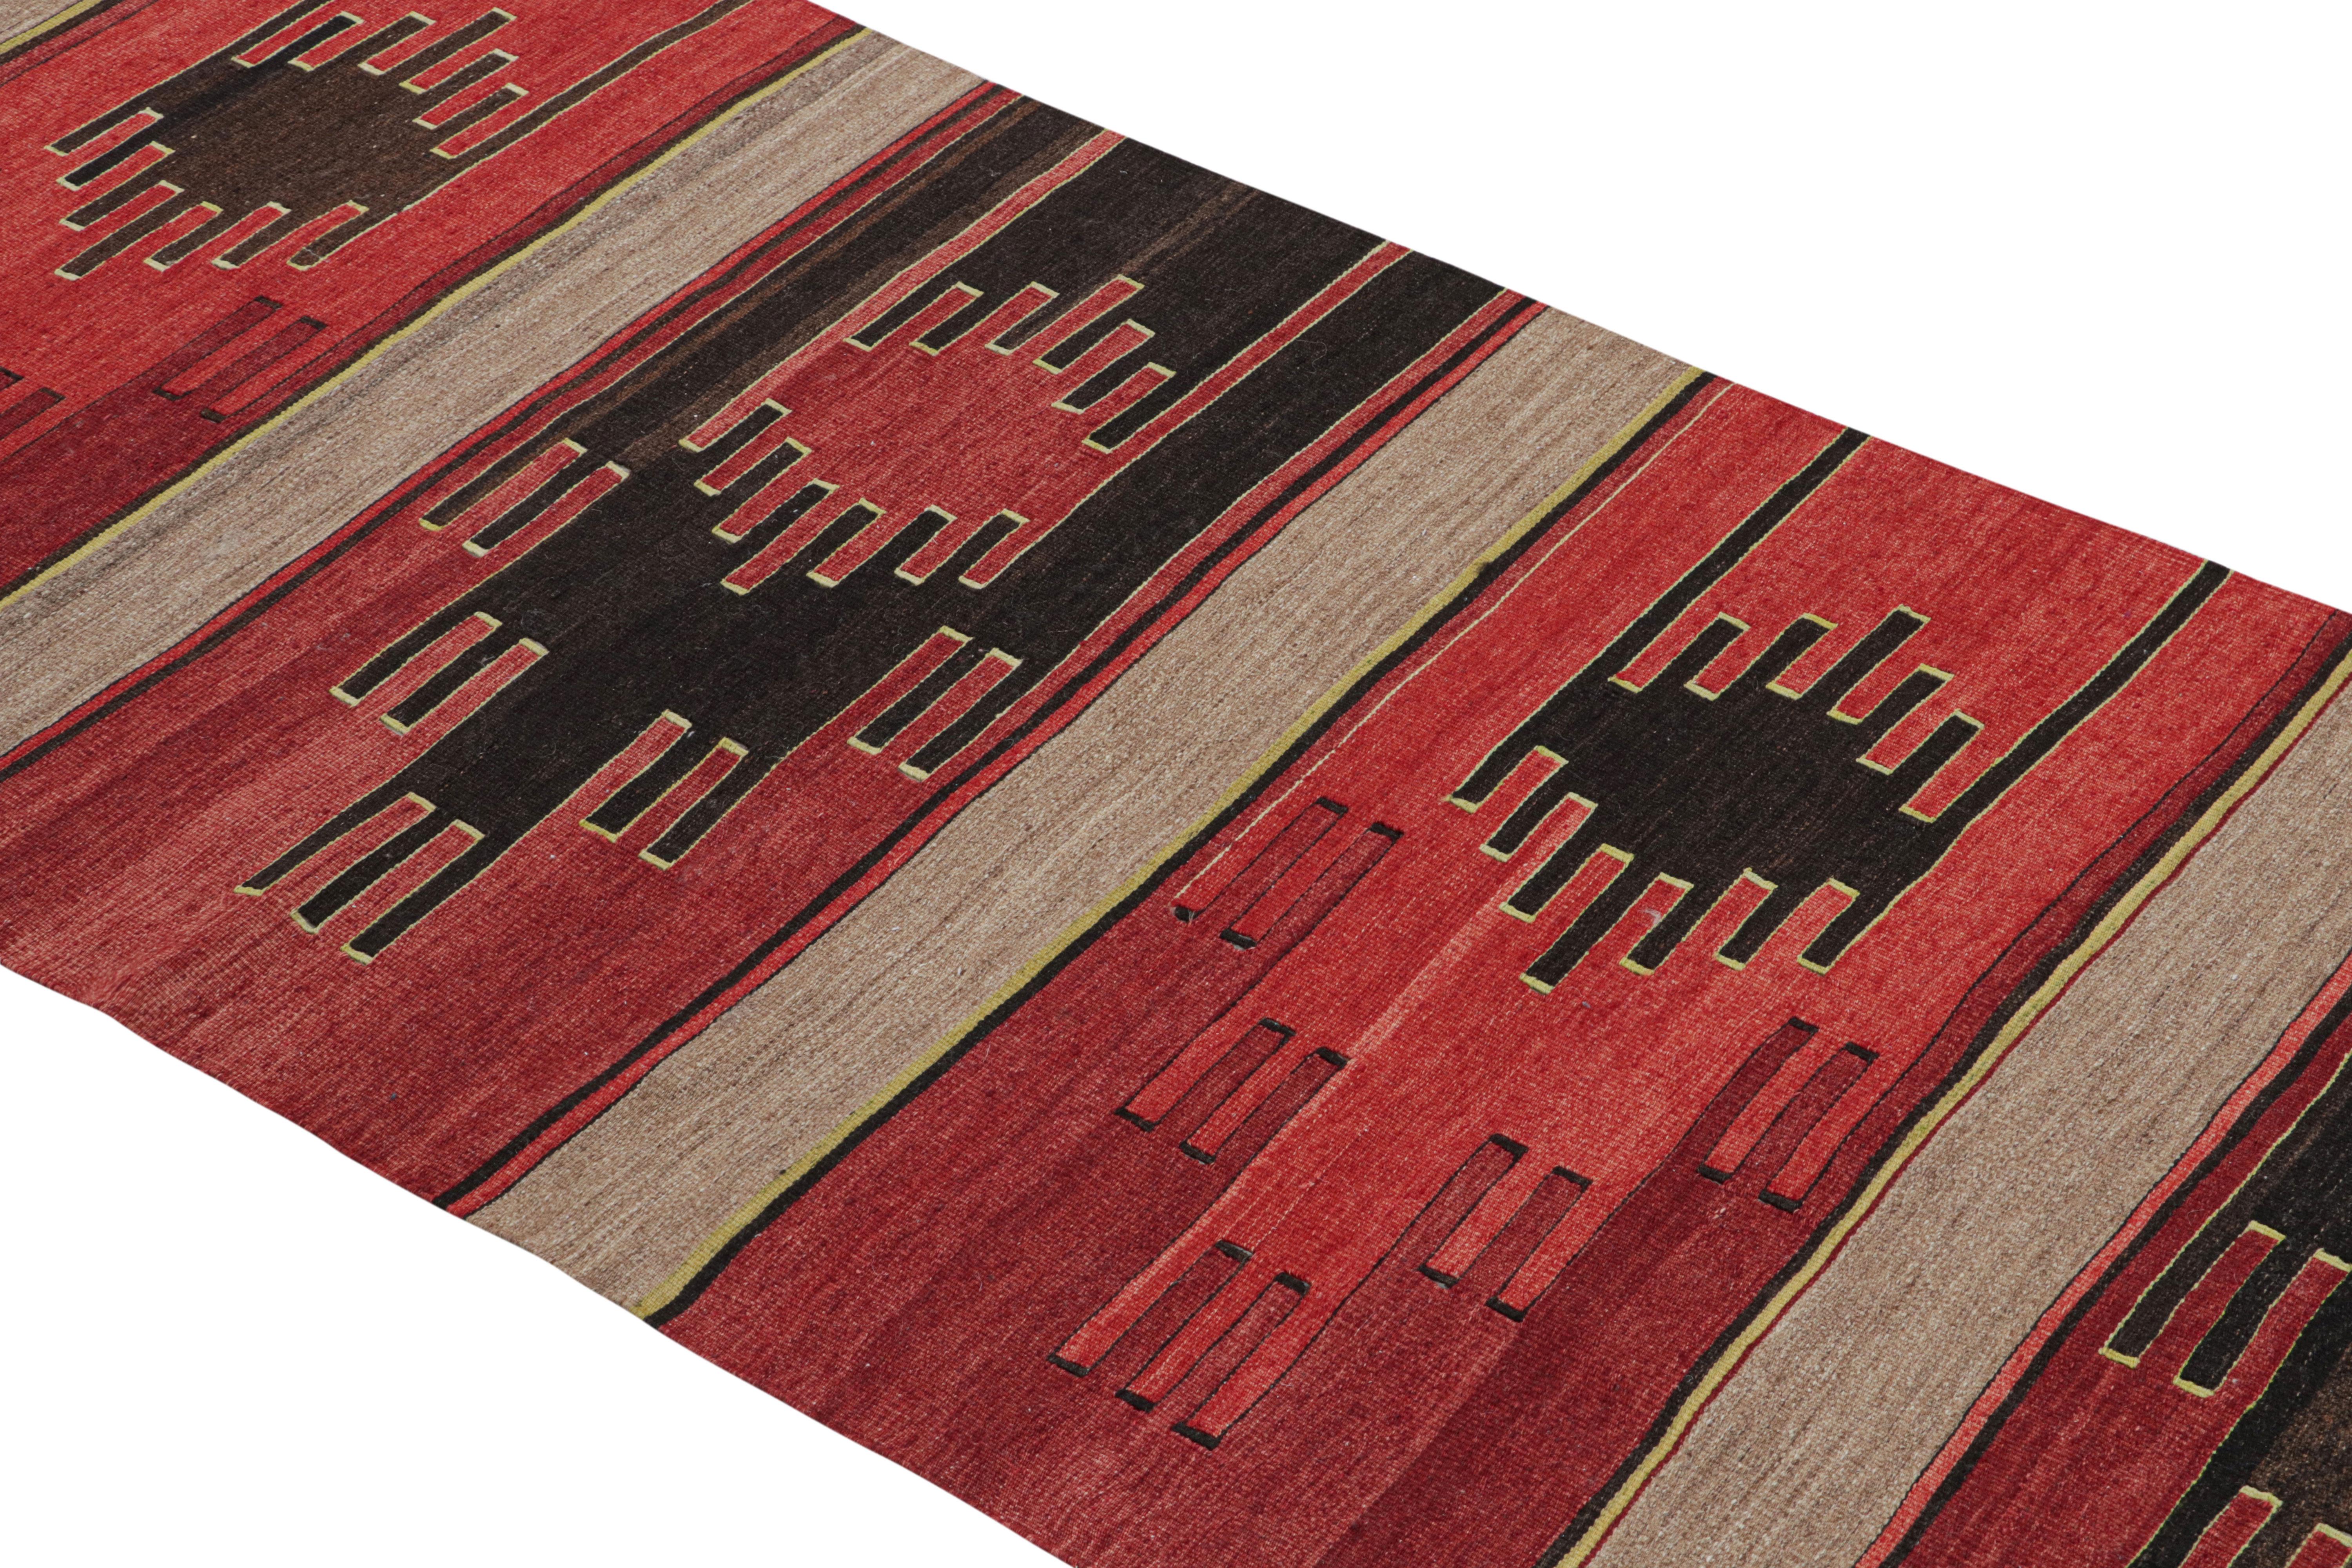 Flat-woven in high-quality wool originating from Turkey between 1930-1940, this vintage Sivas Kilim rug blends a tasteful, Classic geometric pattern with a rich tribal variation of tangerine and burgundy red, yellow, and unique black colorways along